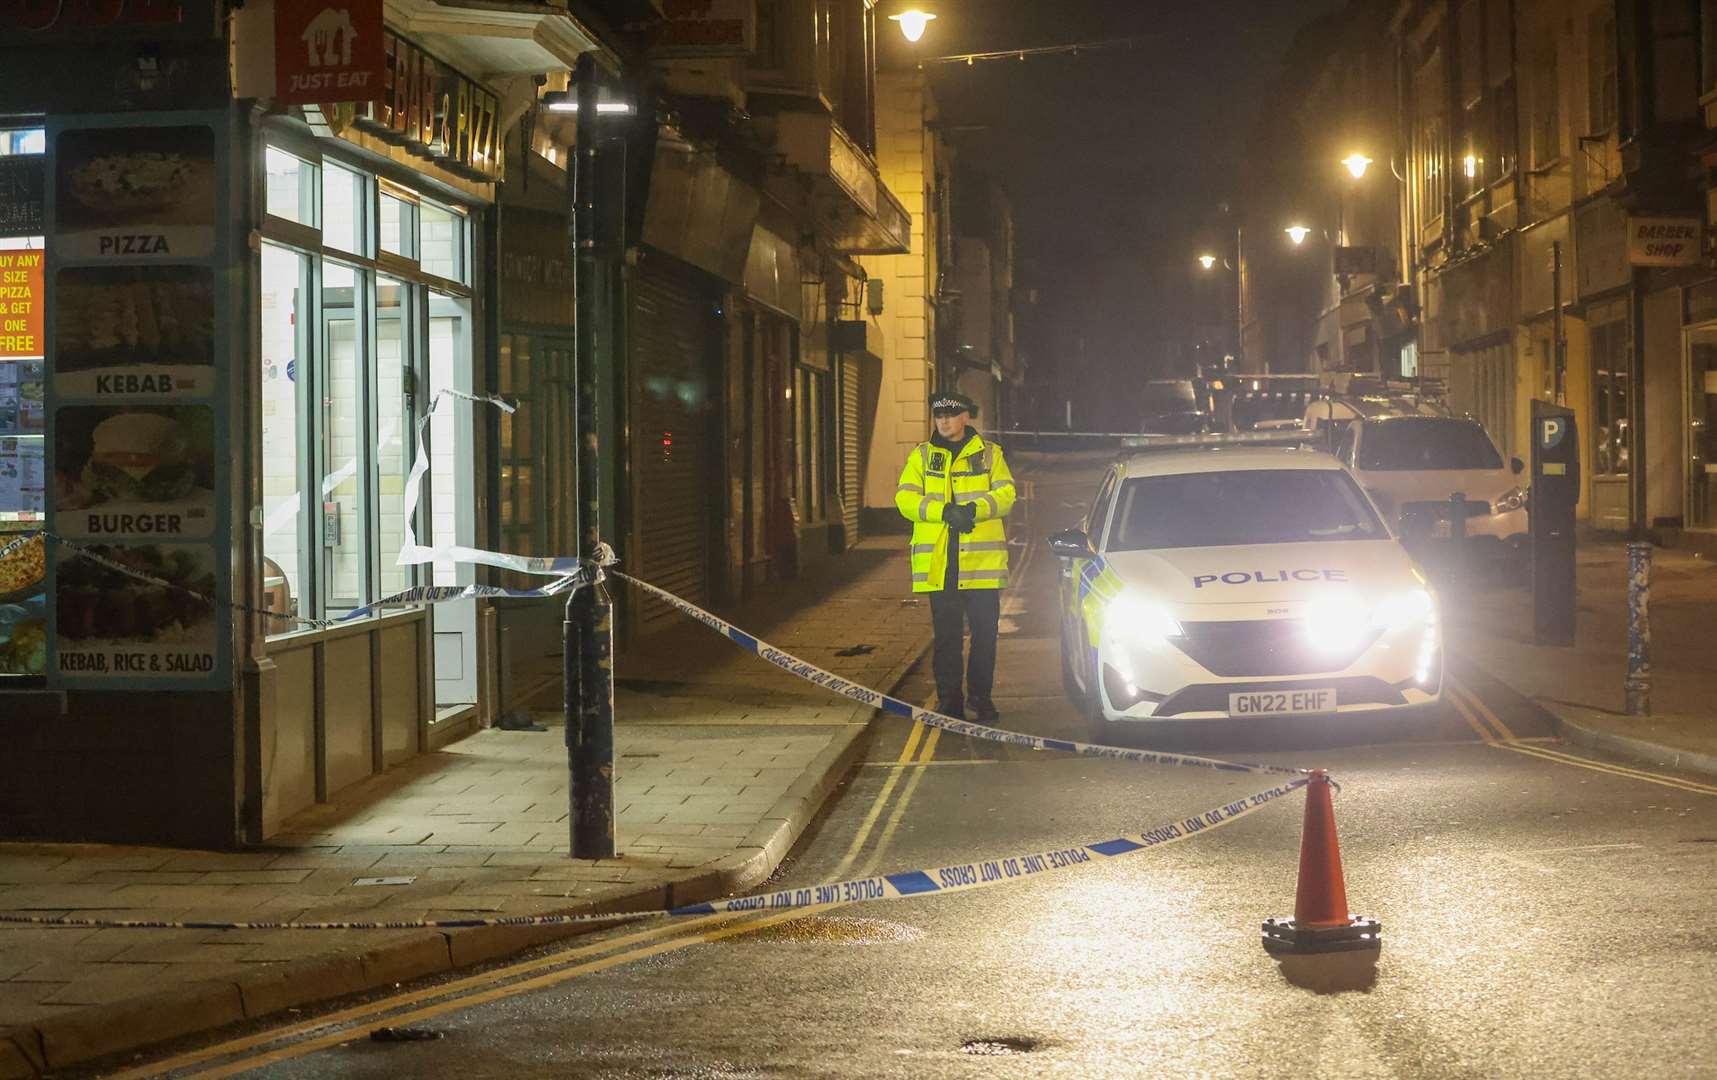 Police at the scene of the suspected stabbing in King Street, Ramsgate. Picture: UKNIP